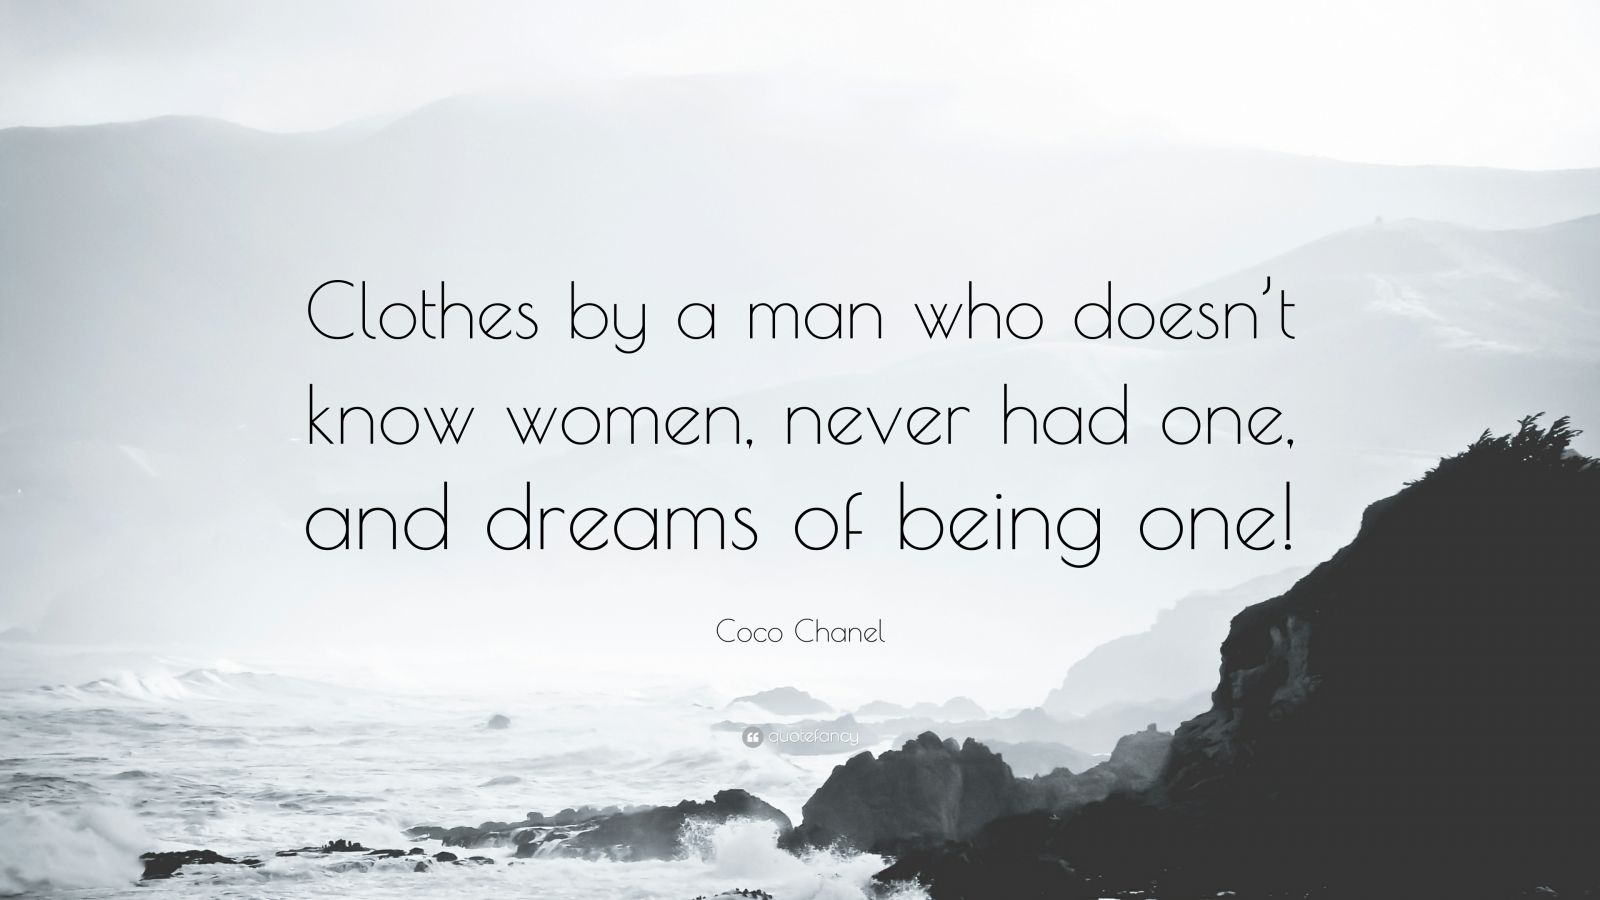 Coco Chanel Quote: “Clothes by a man who doesn't know women, never had one,  and